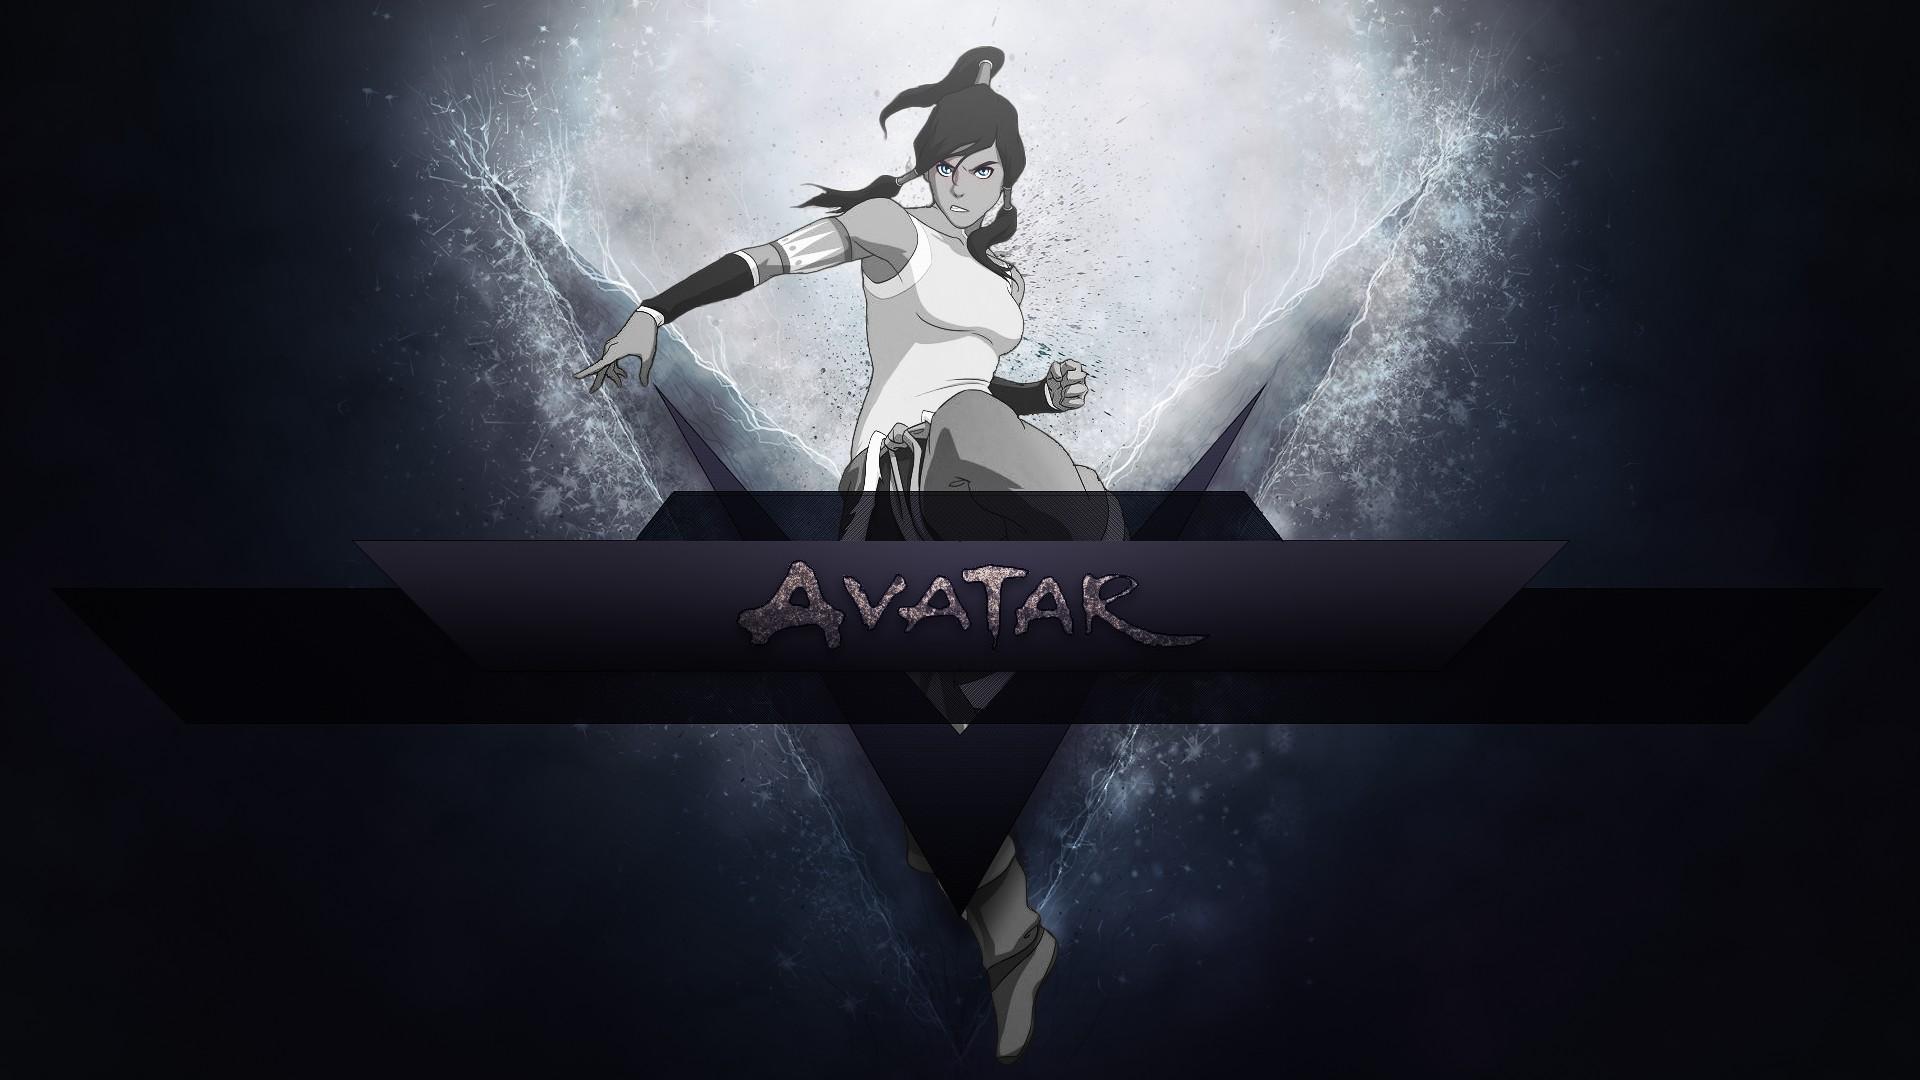 Series korra animated movies the legend of wallpaper HD 1920x1080.